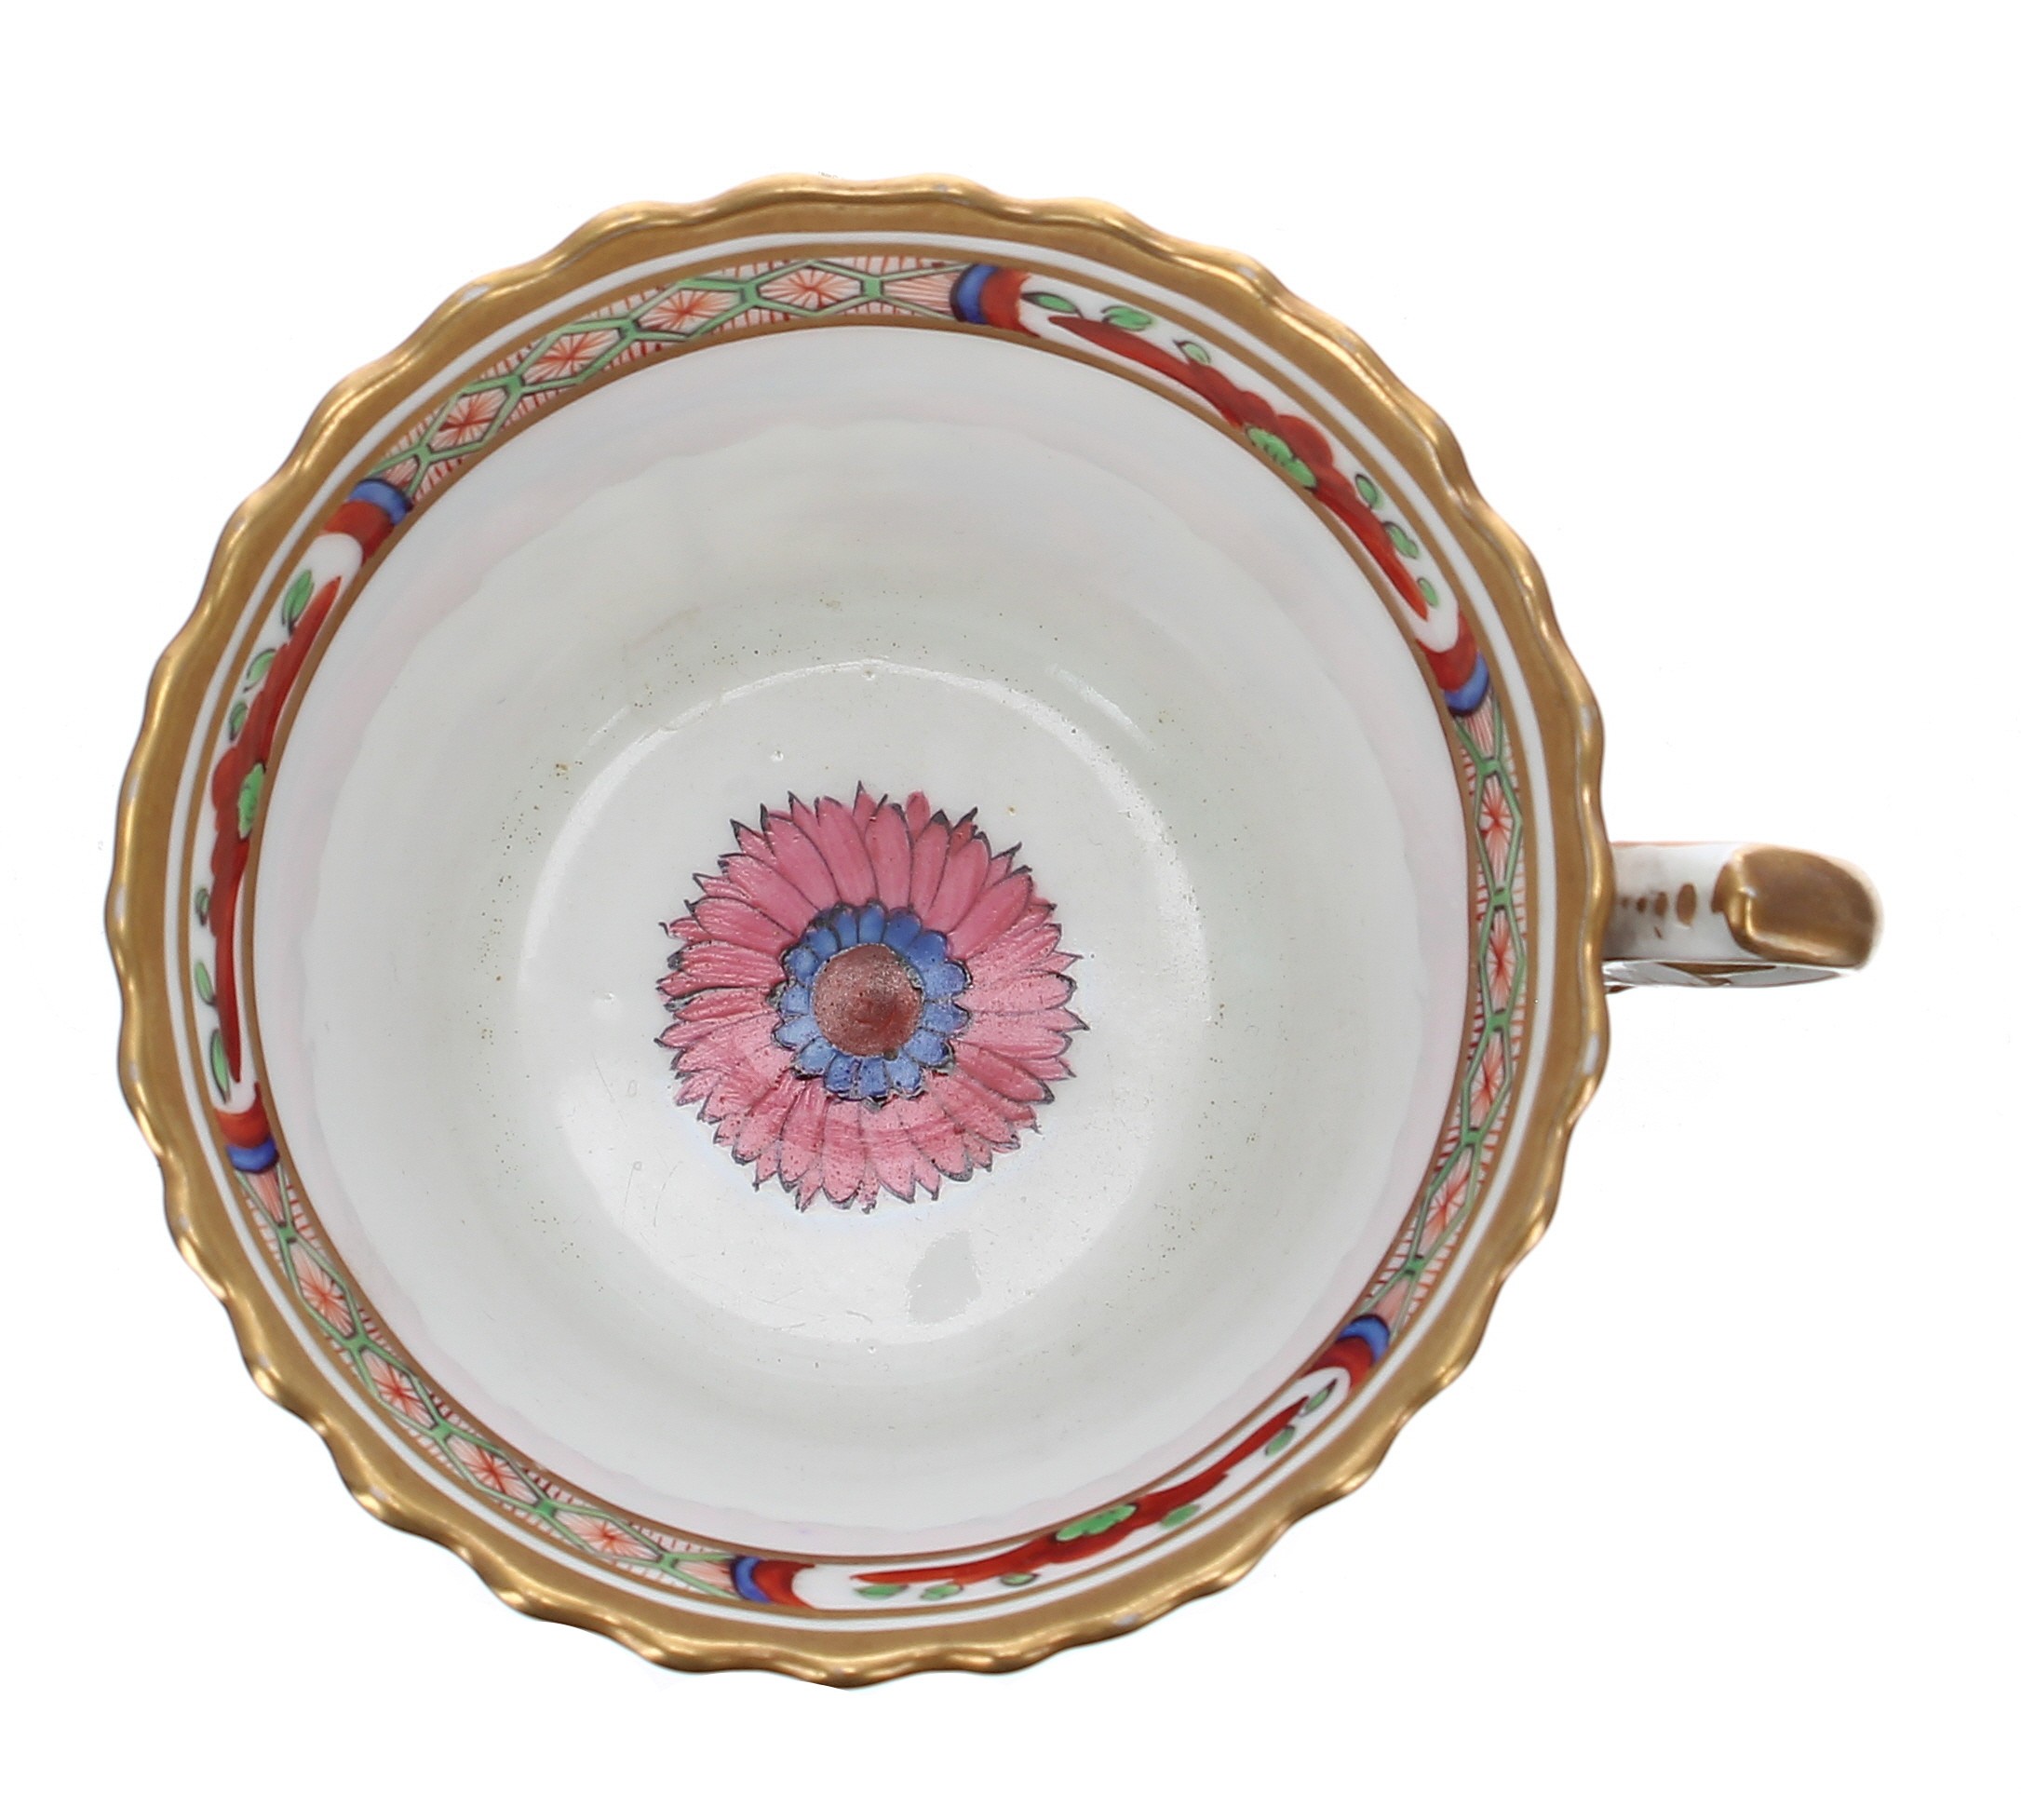 Chamberlains Worcester 'Dragon in Compartment' pattern porcelain cup and saucer, early 19th century, - Image 3 of 3